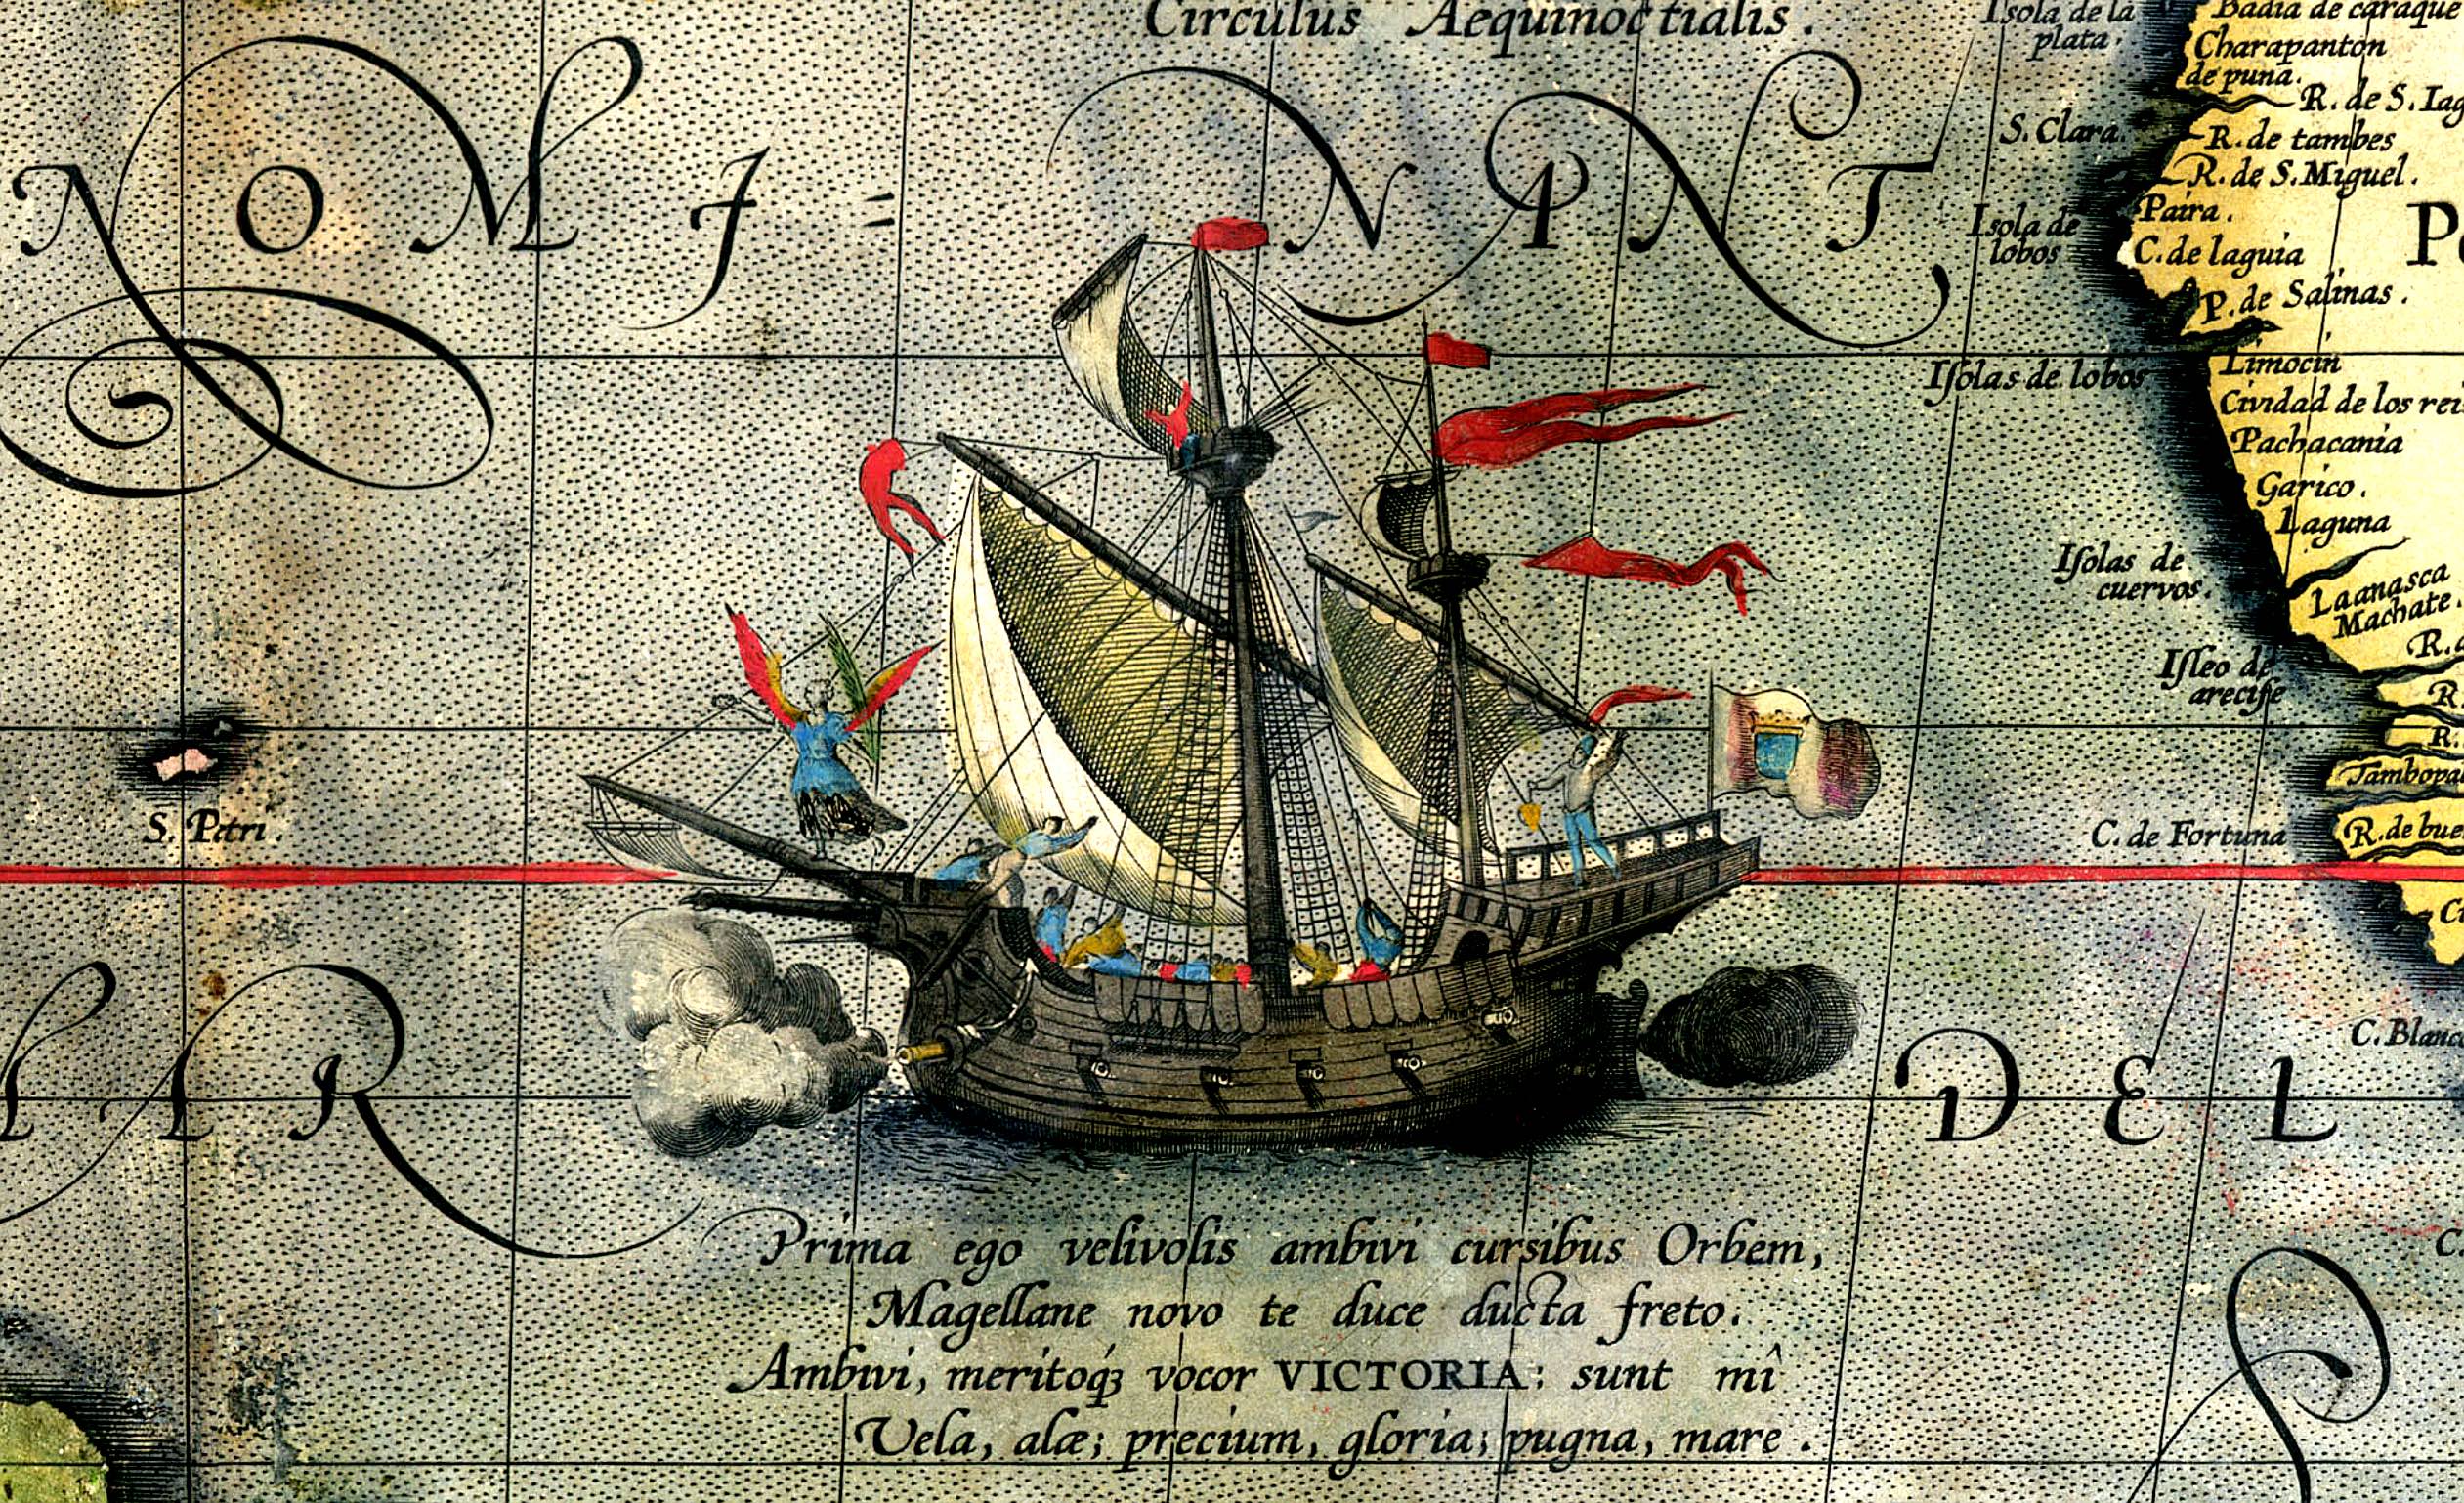 Magellan's ship Victoria, detail from a world map by Abraham Ortelius, 1590